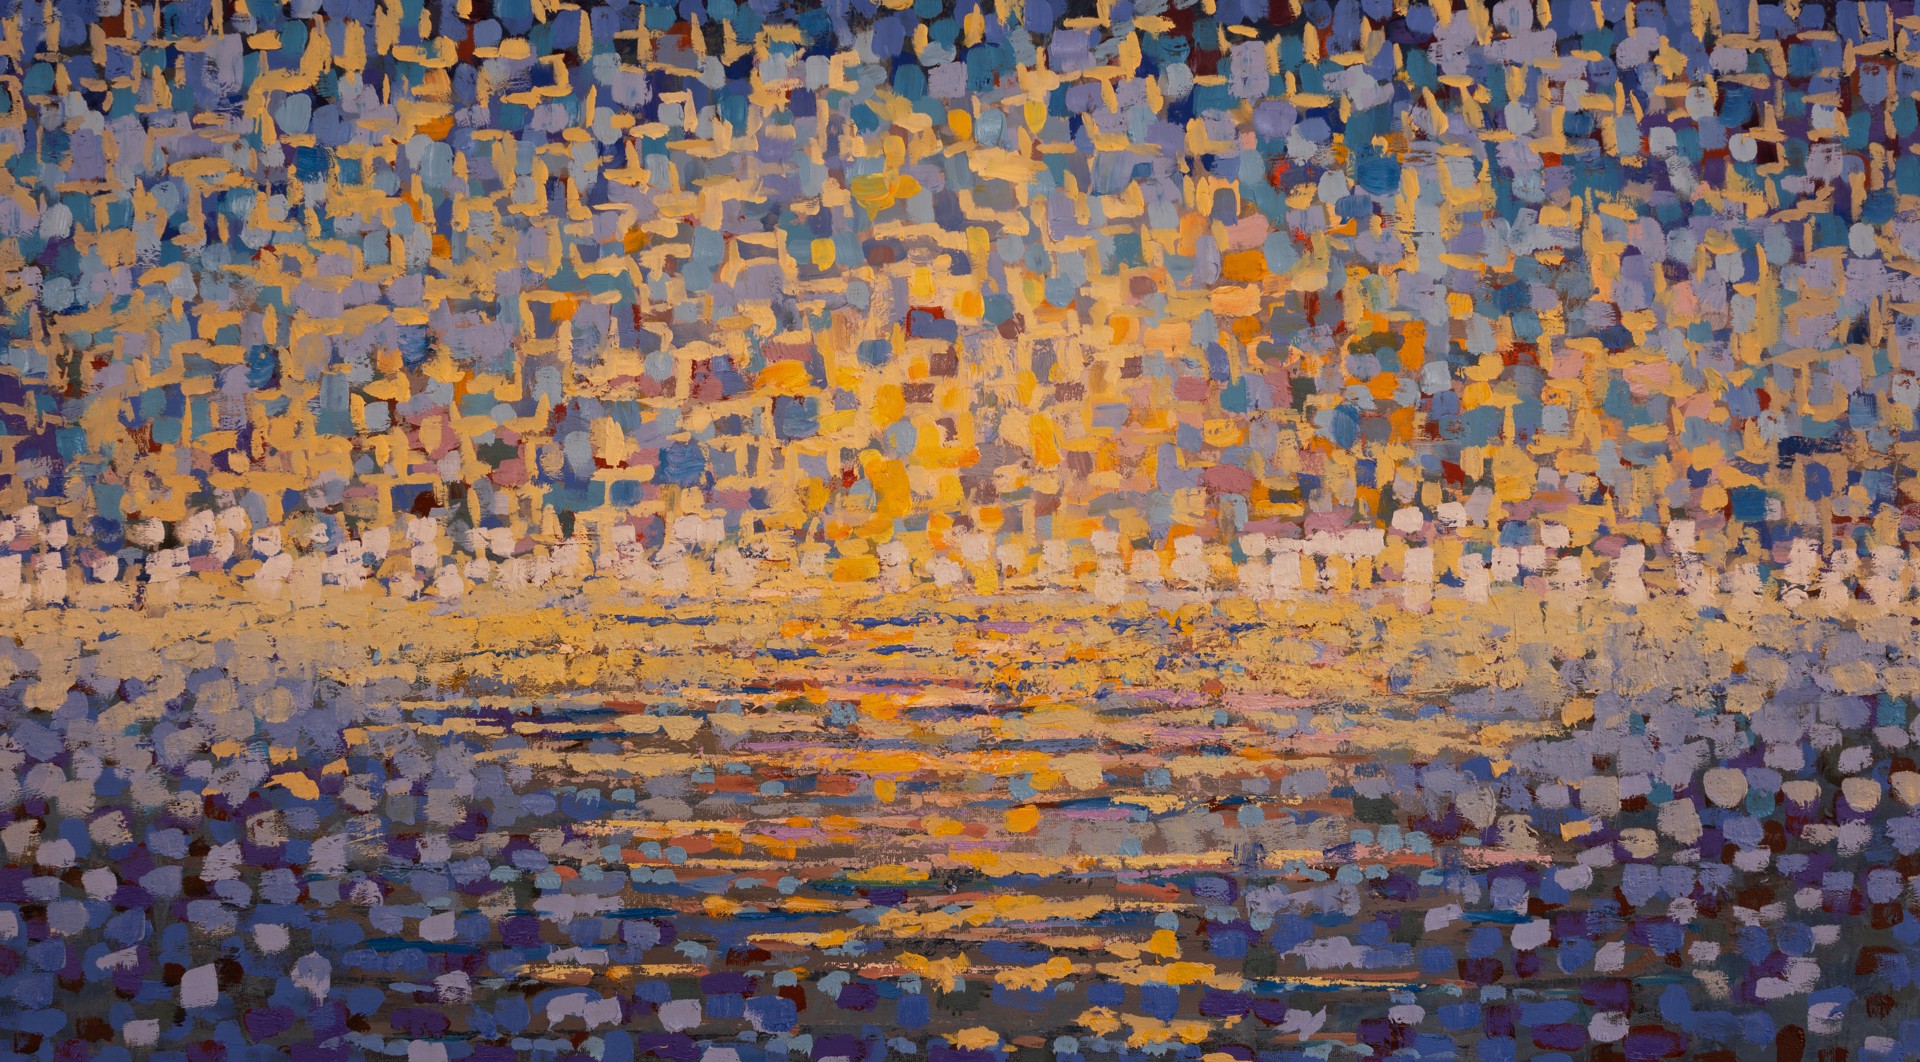 Ocean 6-Vibration in Yellow and Violet by Robert Gamblin